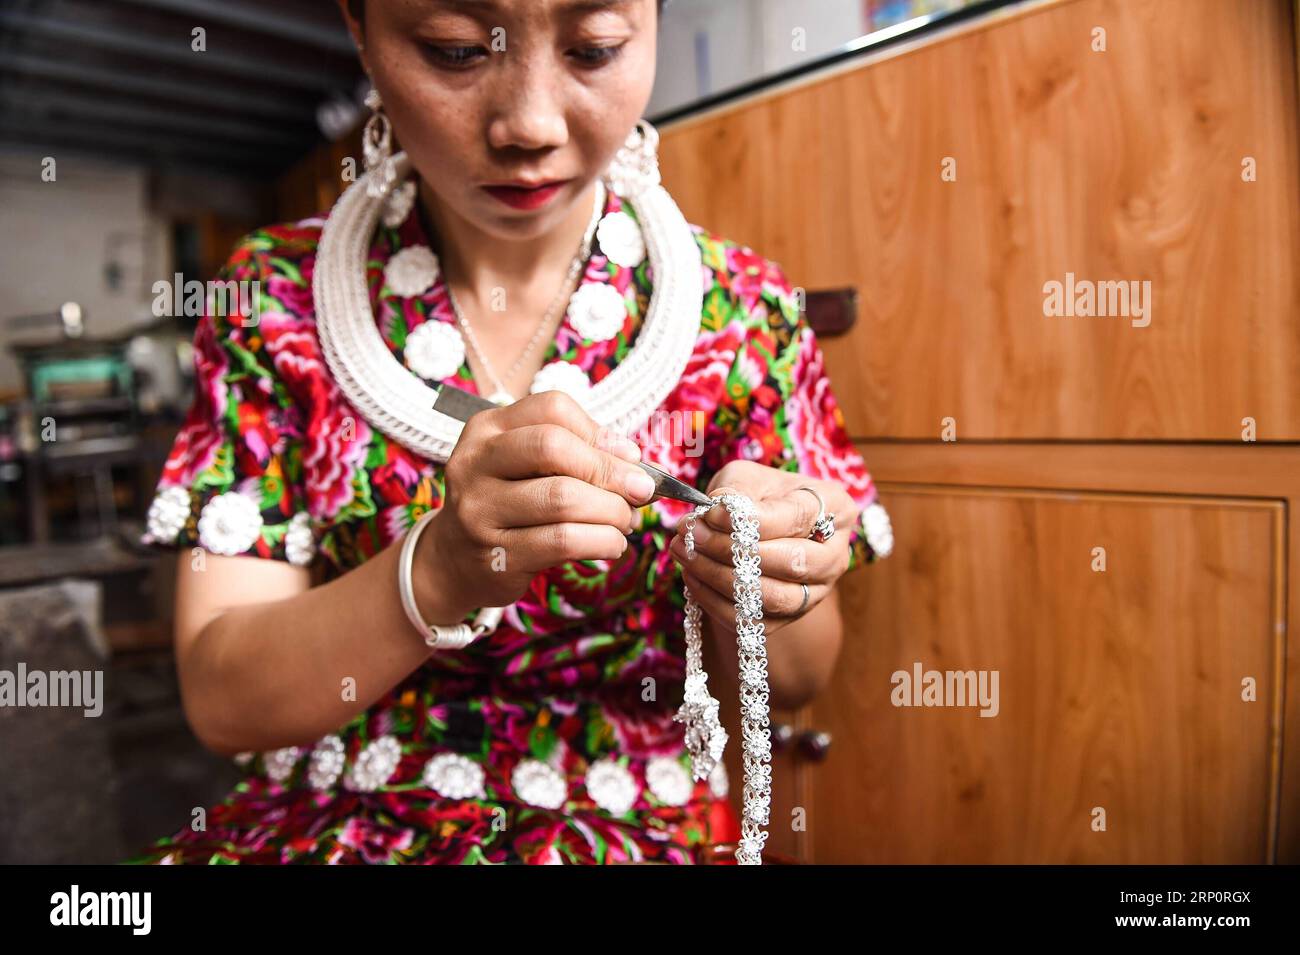 (180523) -- KAILI, May 23, 2018 -- Yang Changlan processes silverwork in Hongxi Village in Wanshui Township of Kaili, southwest China s Guizhou Province, May 22, 2018. The 36-year-old Yang Changlan has engaged in silverwork making for 12 years. In 2017, Yang and her husband founded a silverwork cooperative and helped other villagers to increase income. )(mcg) CHINA-GUIZHOU-KAILI-SILVERSMITH (CN) TaoxLiang PUBLICATIONxNOTxINxCHN Stock Photo